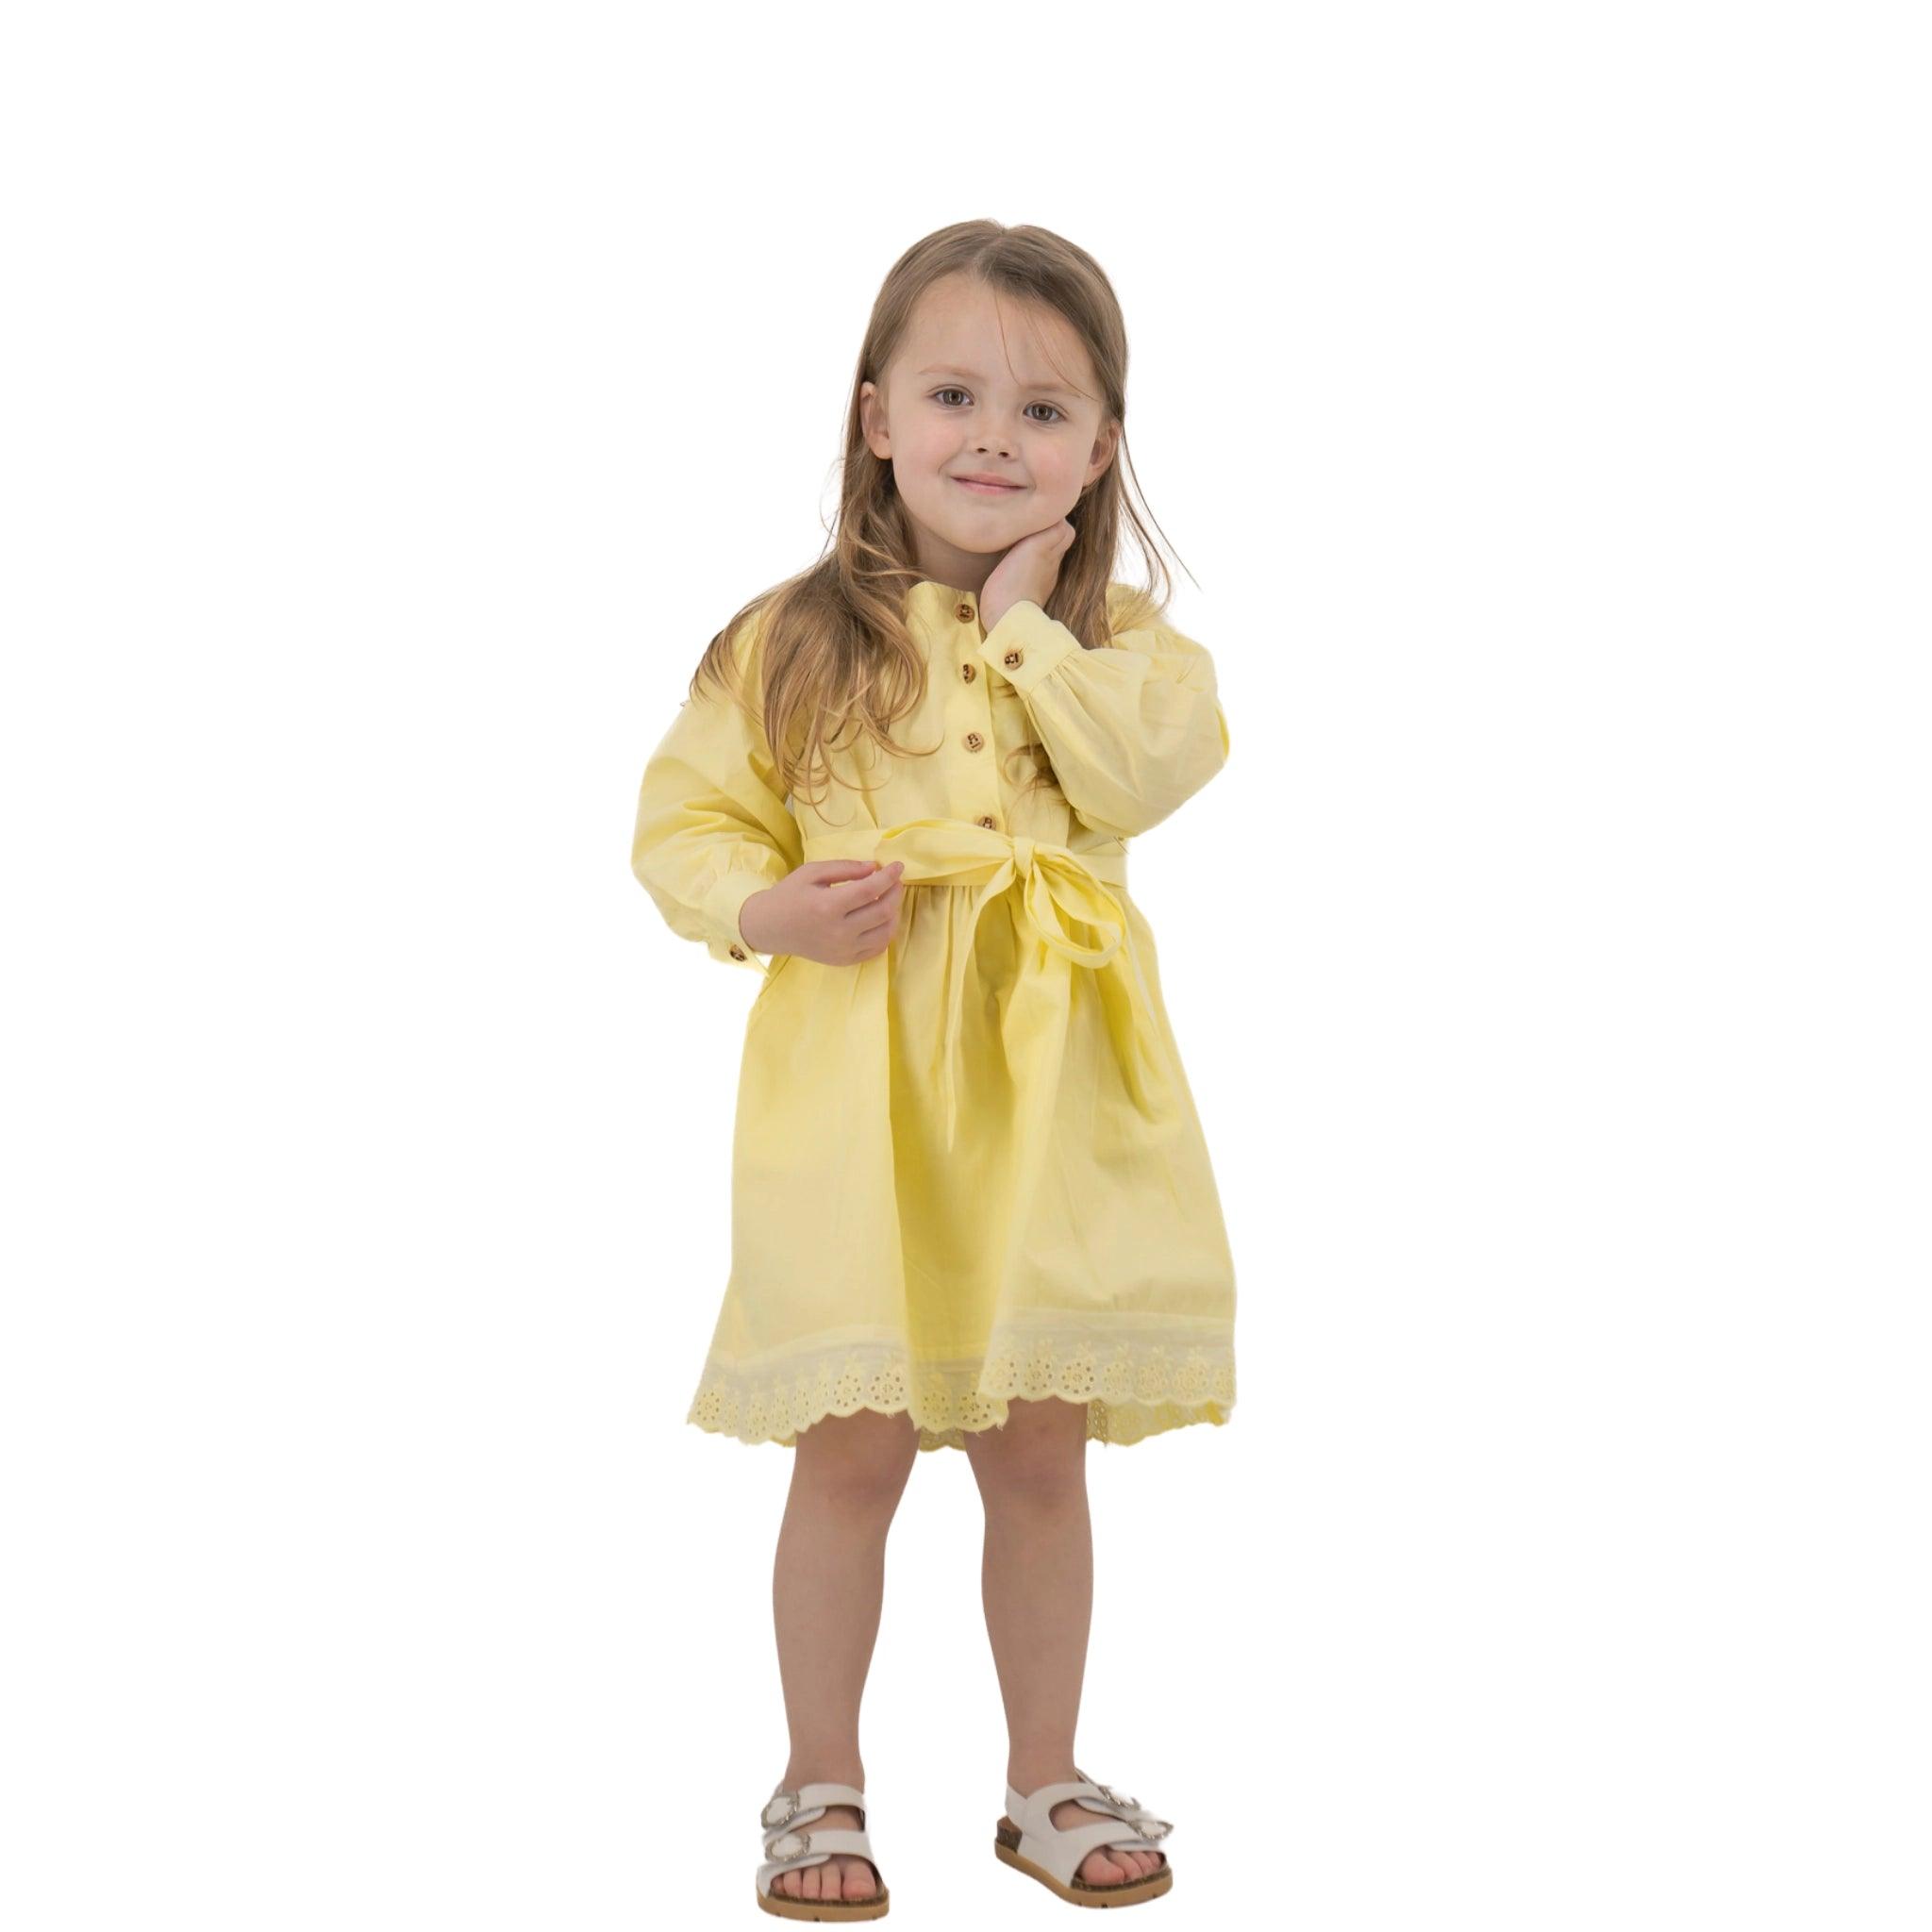 A young girl with long hair, wearing a Karee yellow long puff sleeve cotton dress and white sandals, stands smiling against a white background.